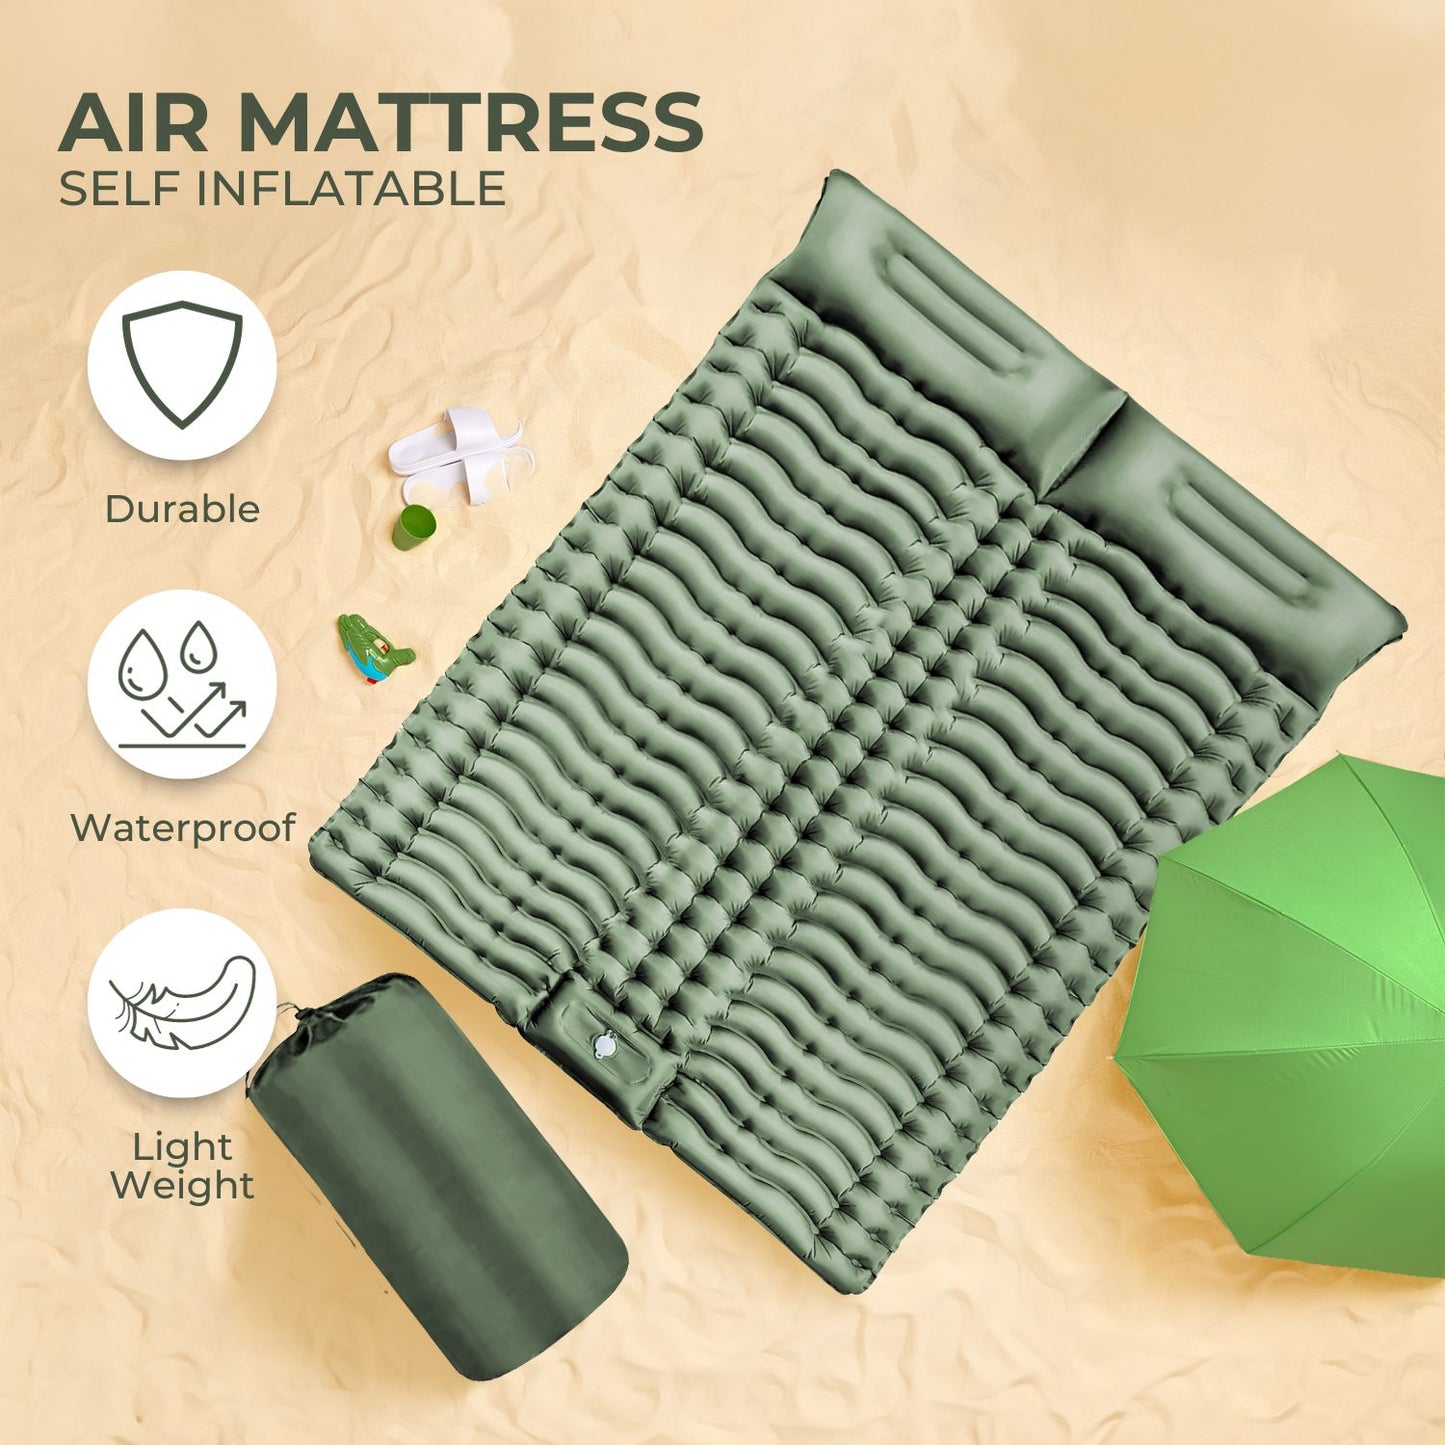 Double Inflatable Camping Sleeping Mat